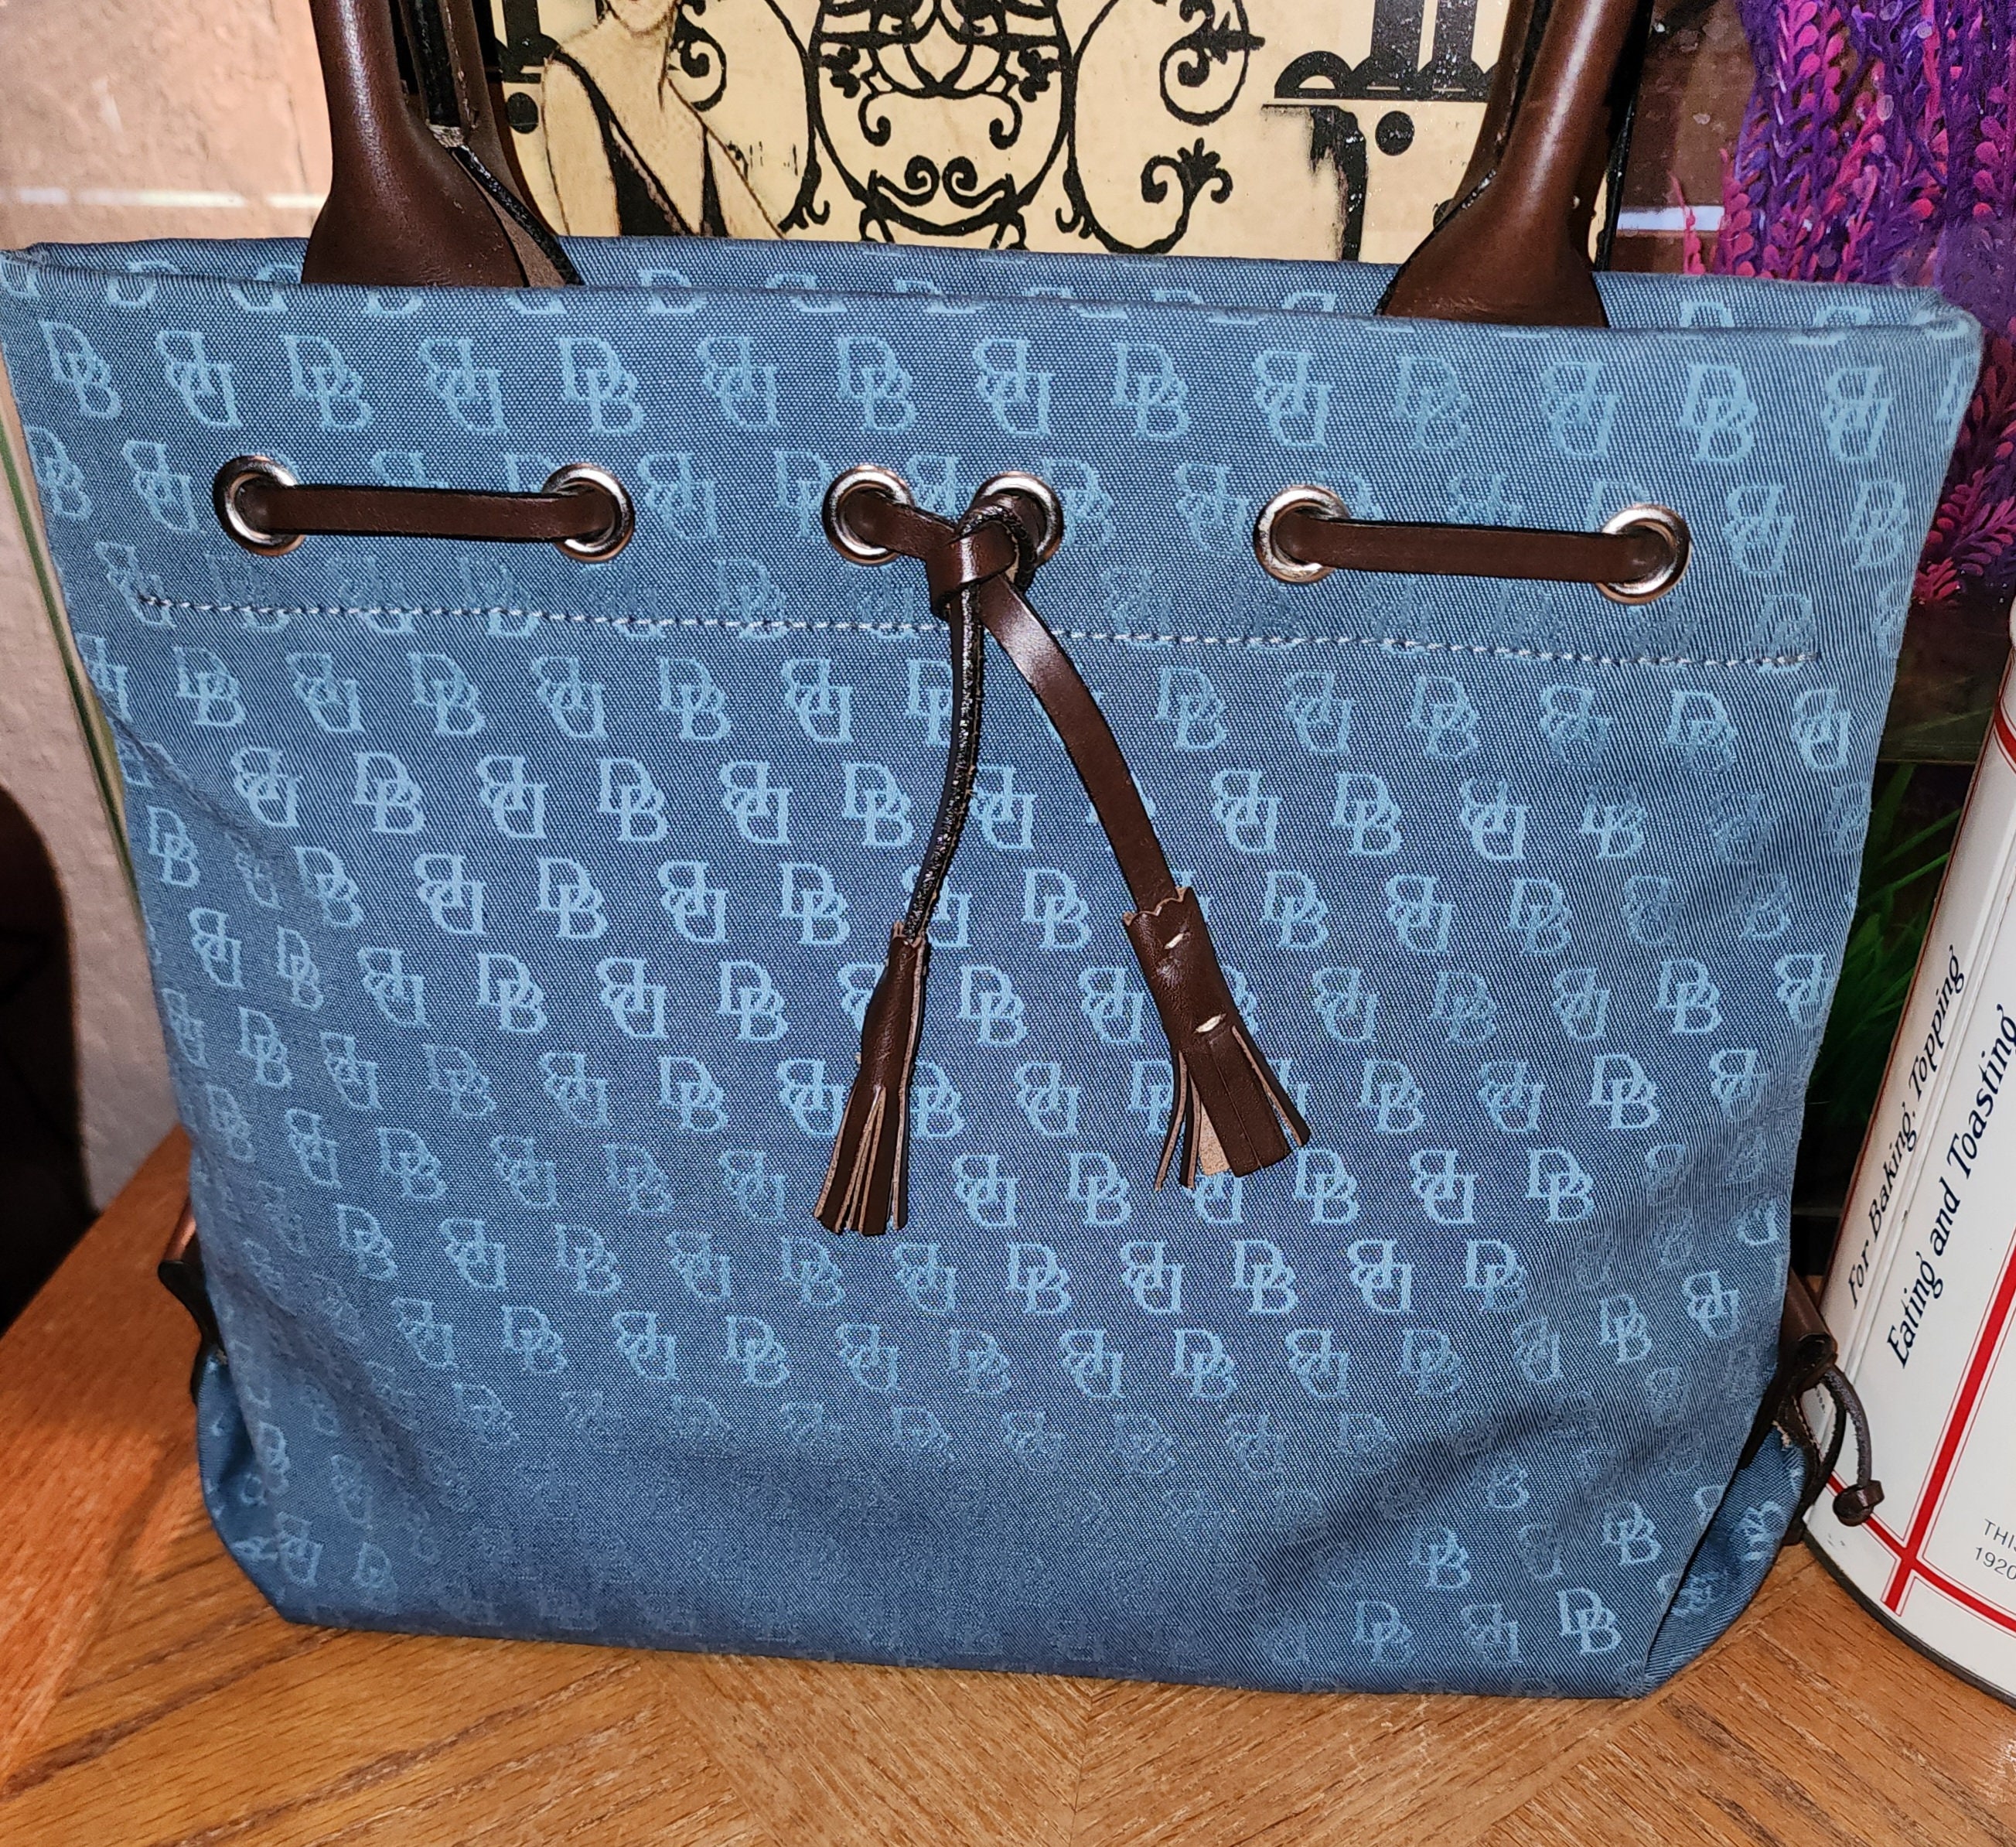 Dooney & Bourke All Weather Leather 3.0 Tote 36